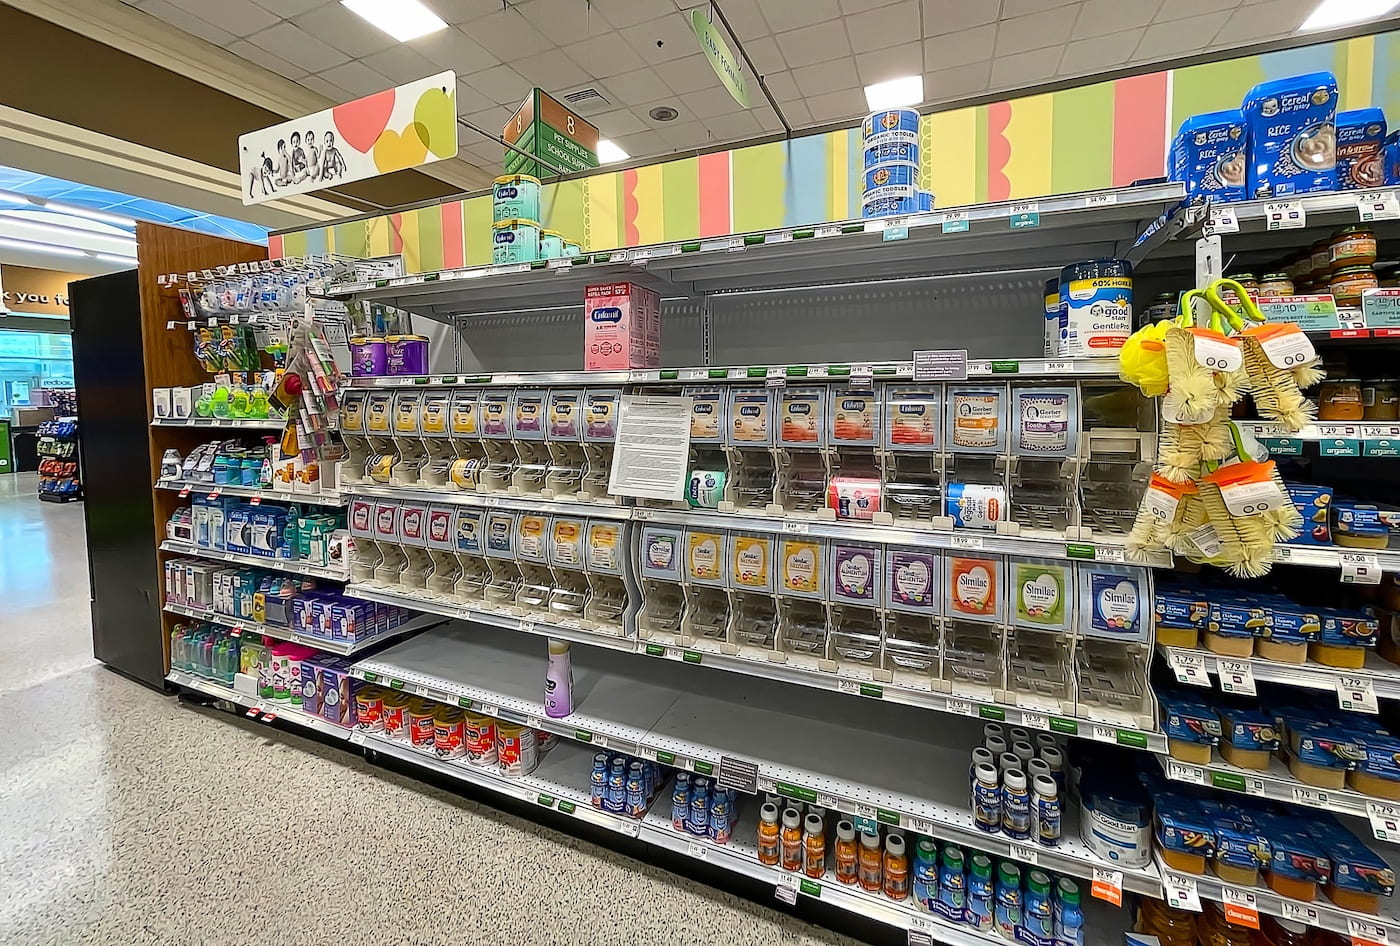 SHORTAGE — Empty baby formula shelves at a grocery store in May 2022 illustrate the level of supply shortage experienced across the nation that year. (Photo courtesy Dreamstime.com)